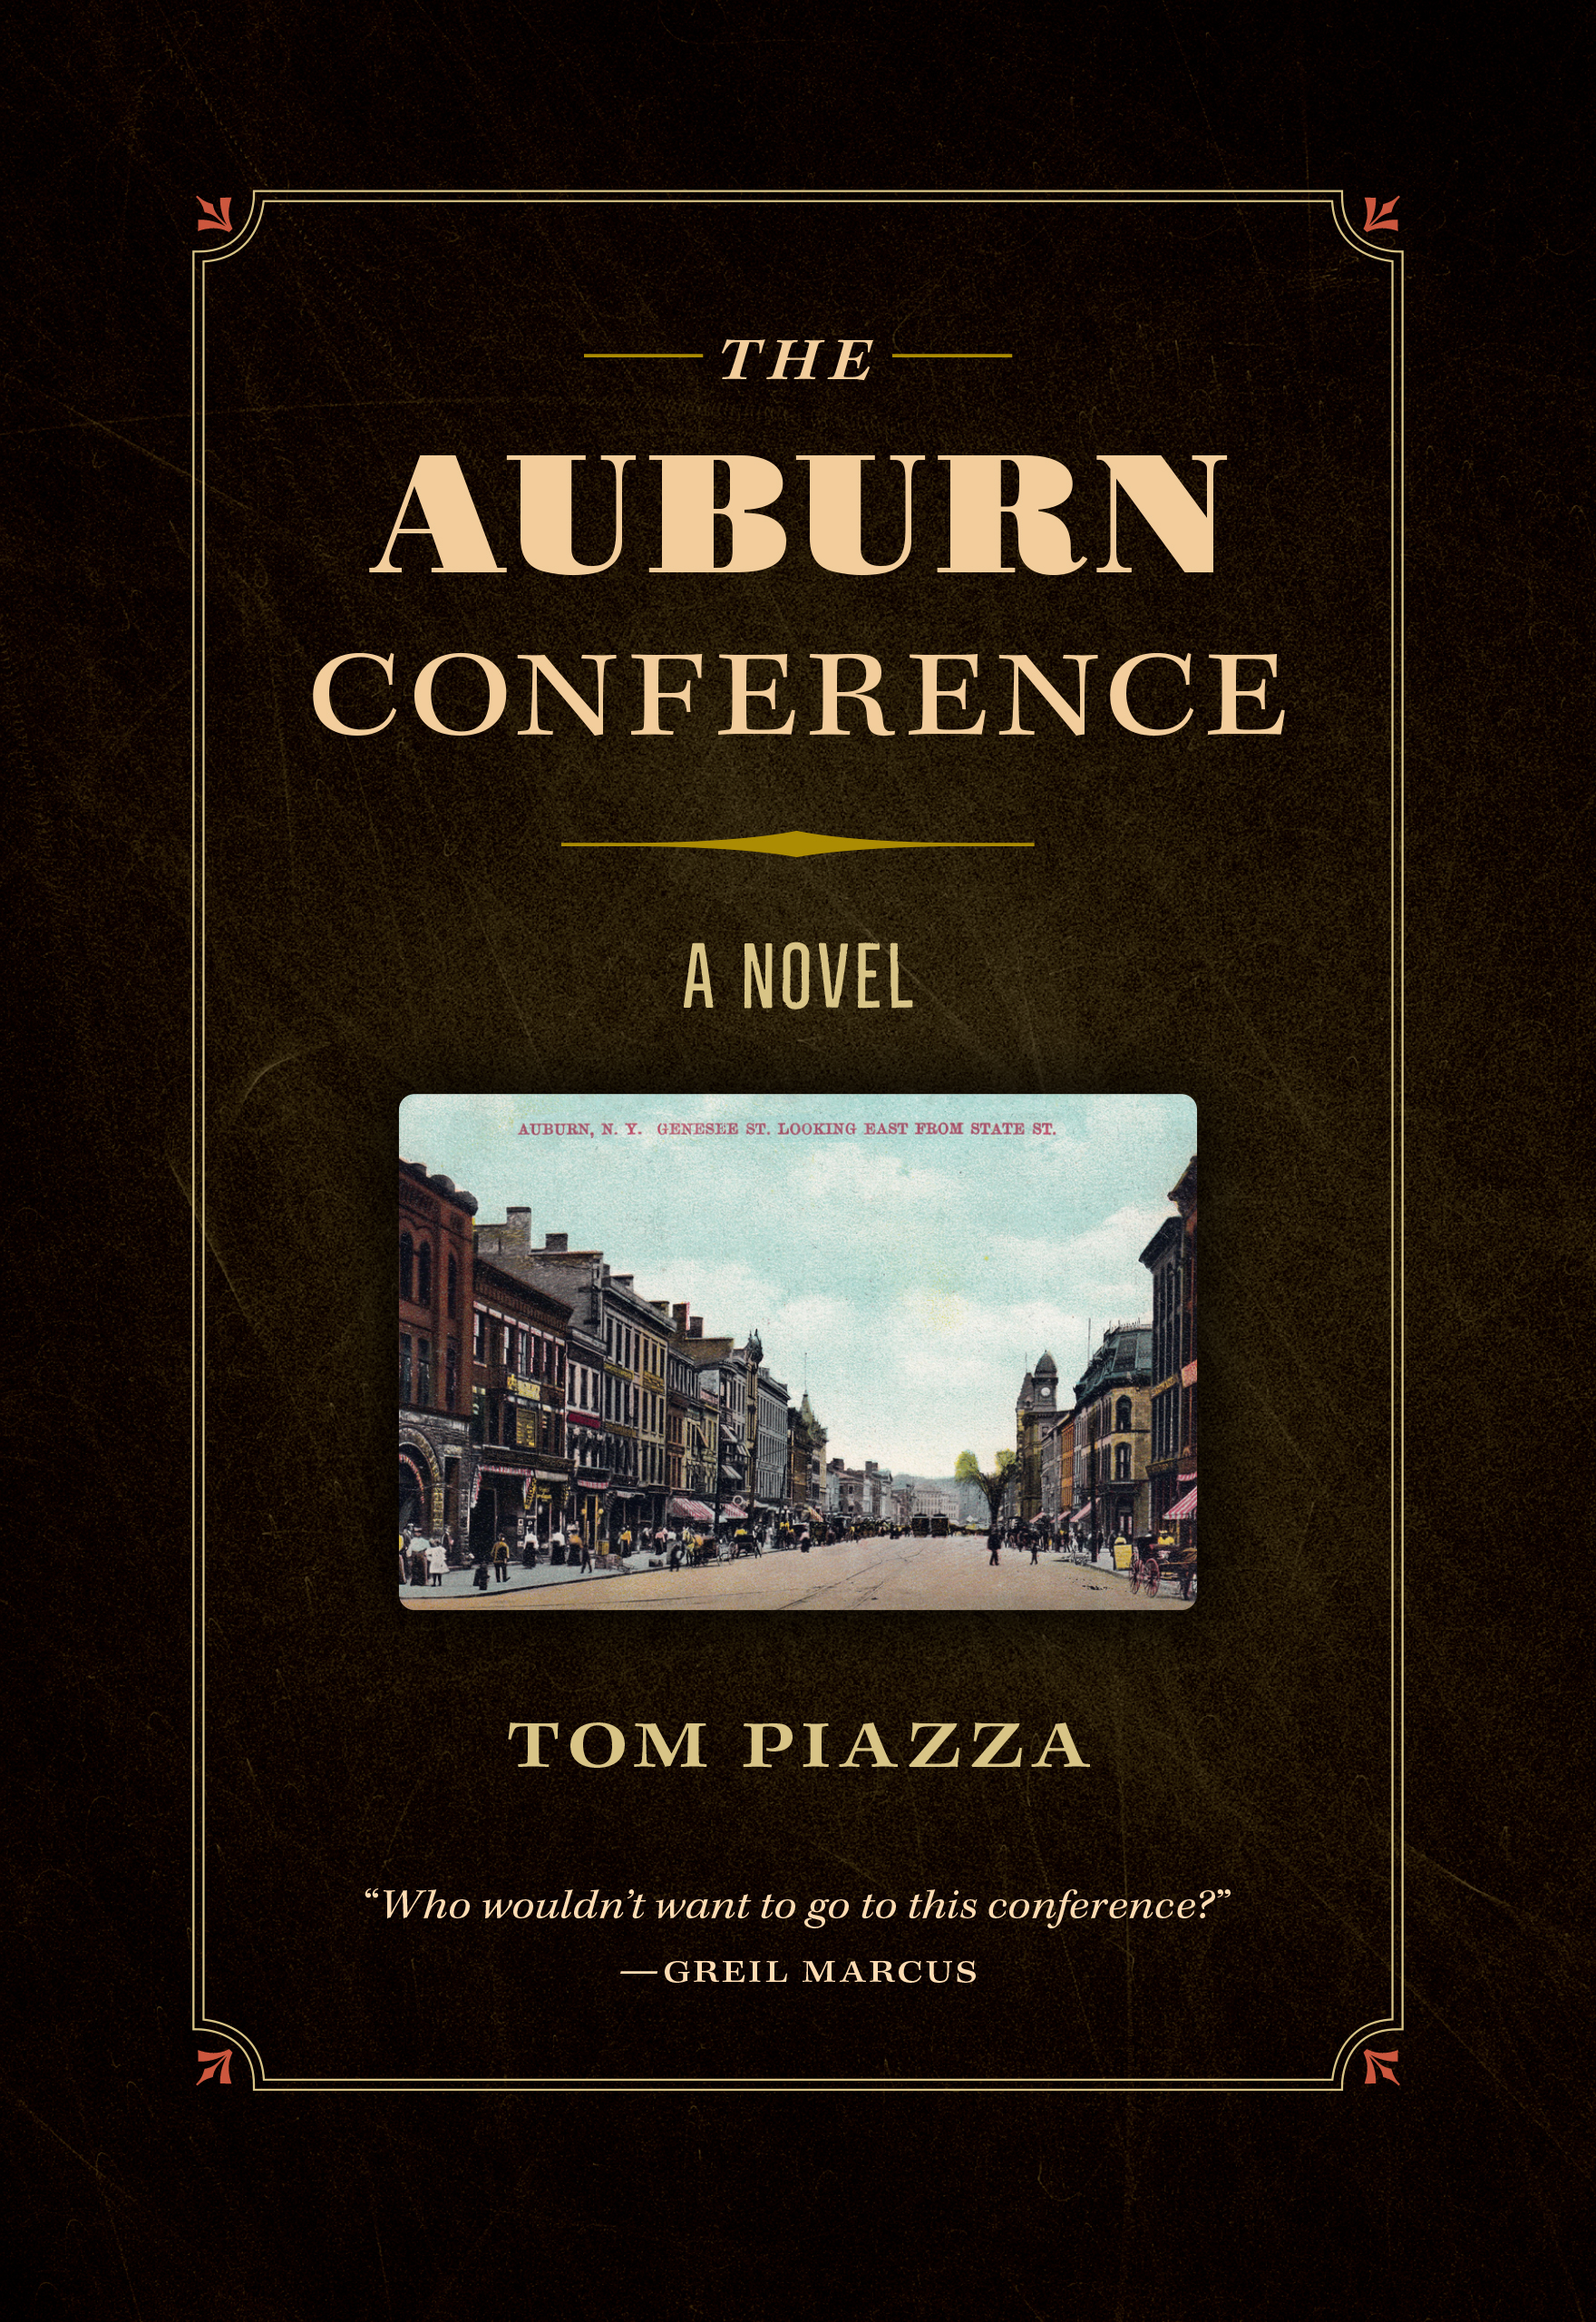 Piazza's The Auburn Conference book cover